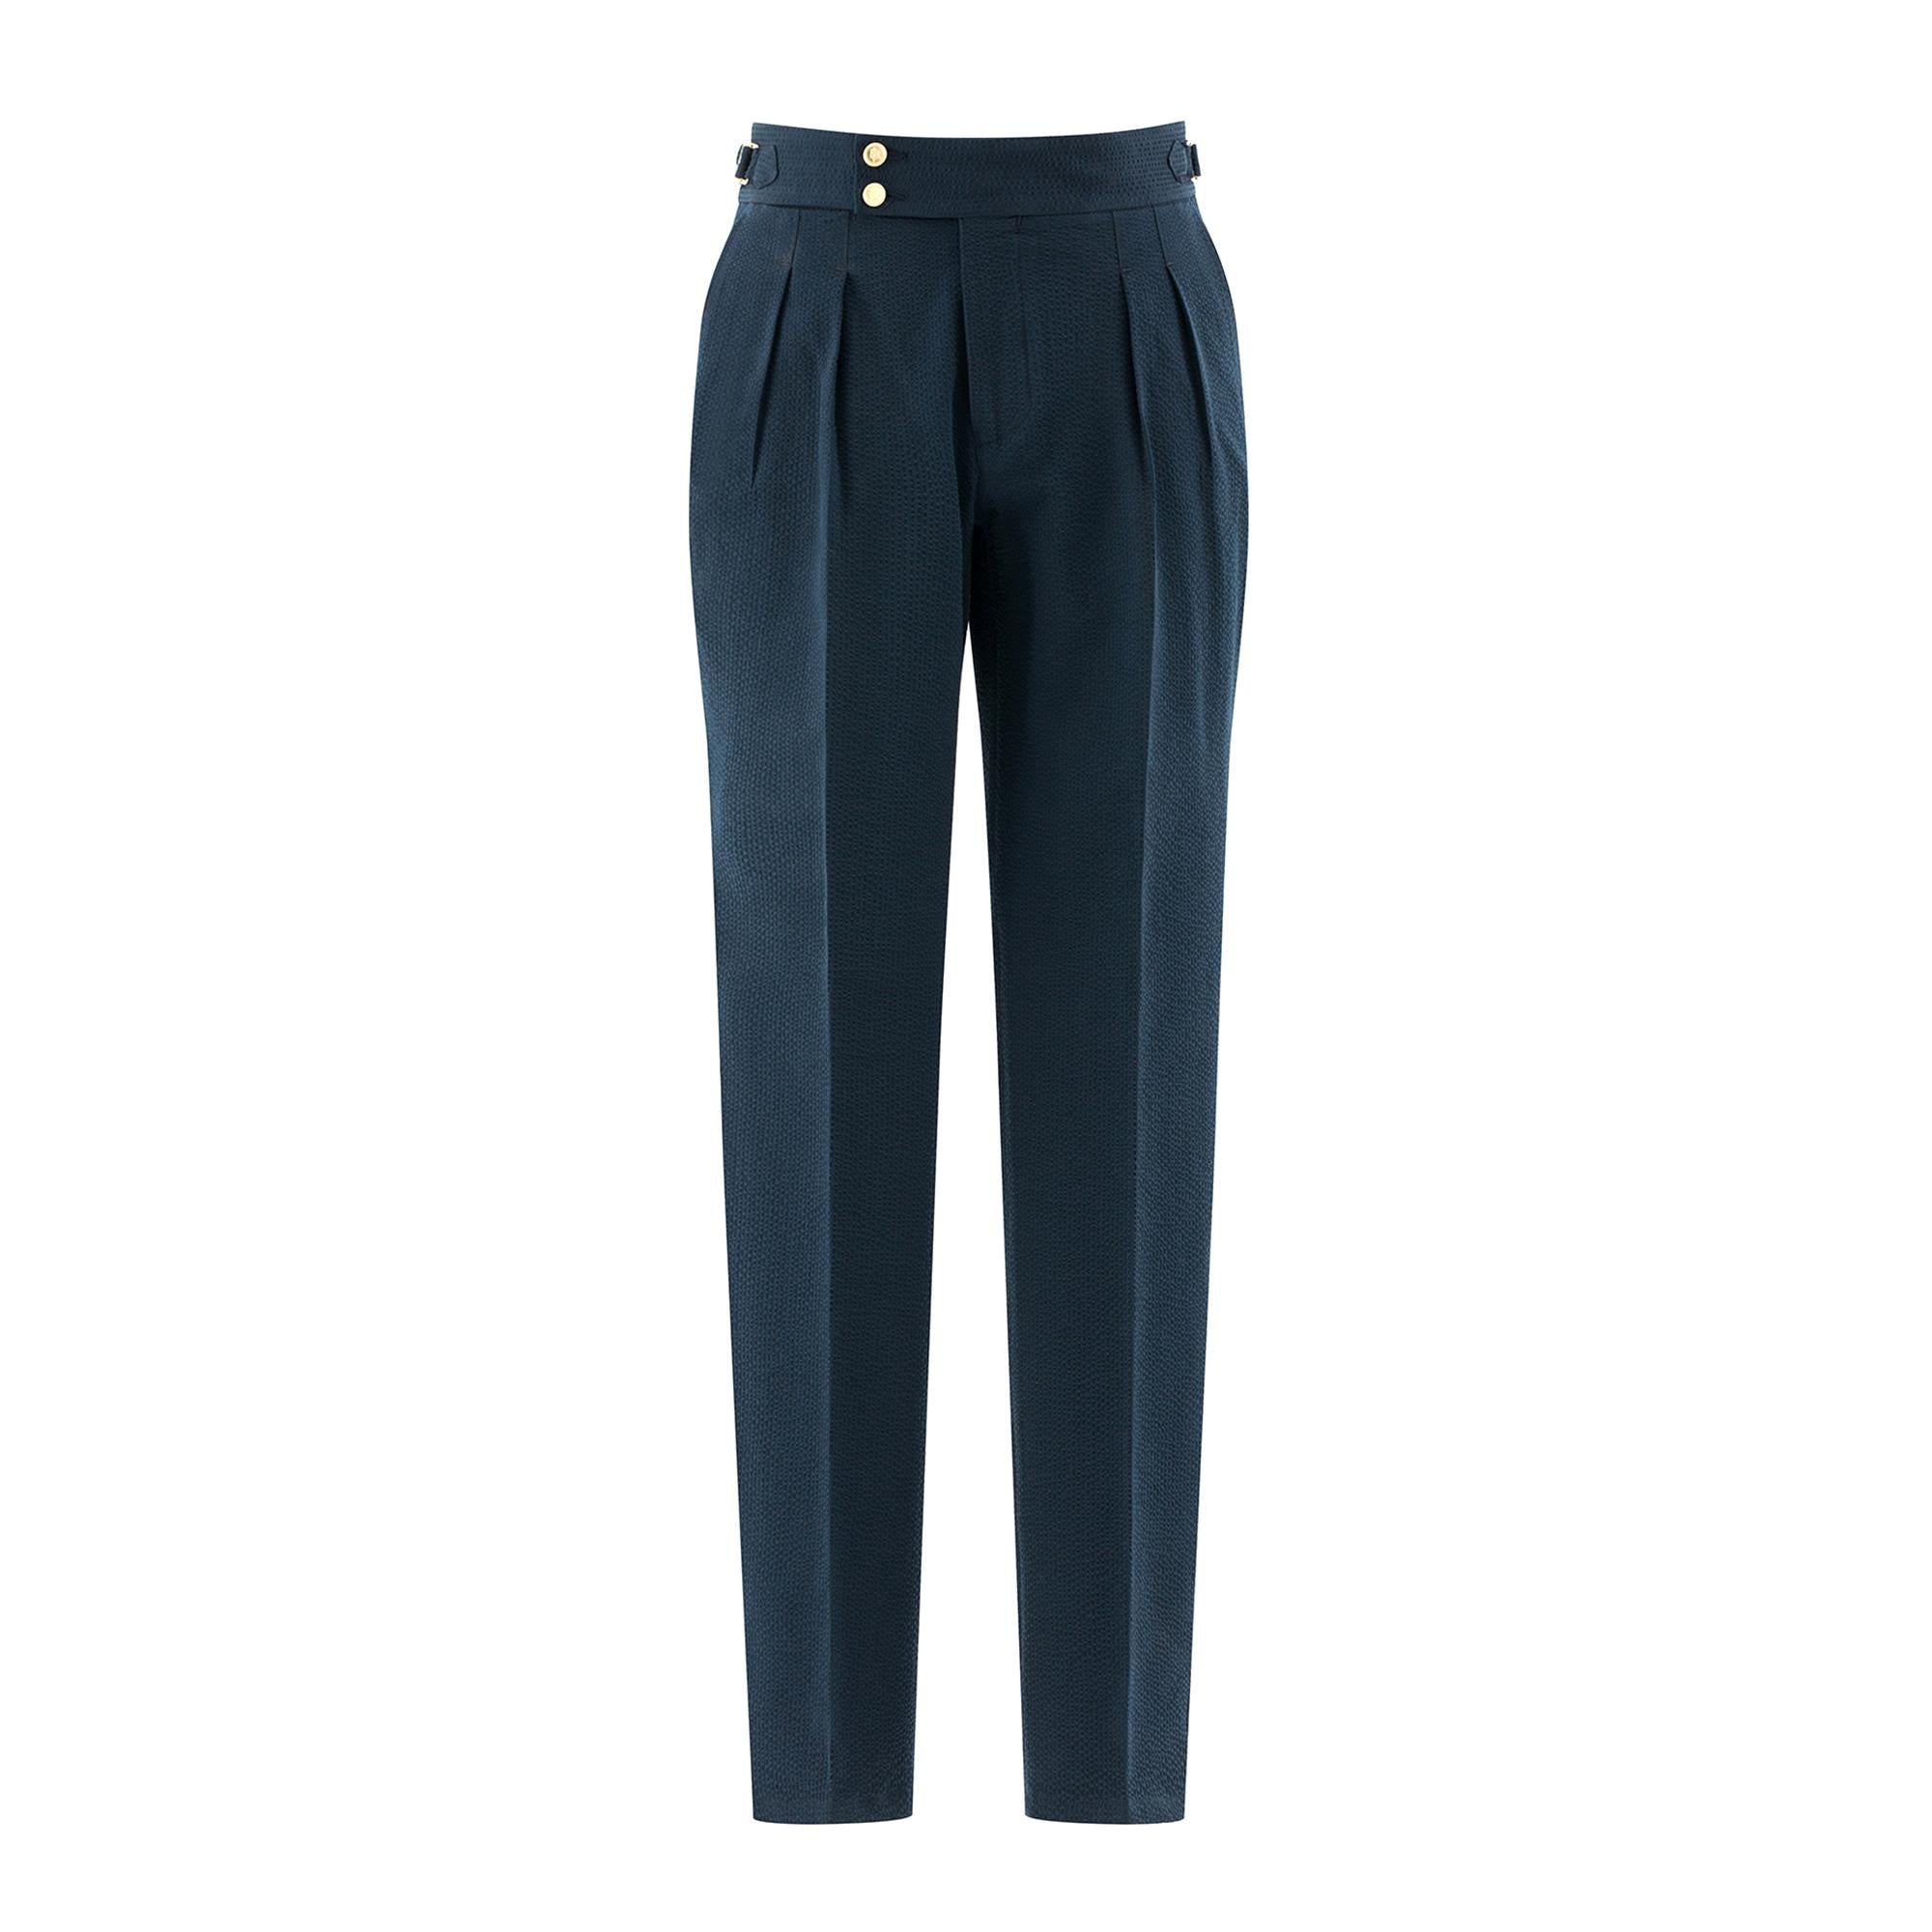 NAVY BLUE TROUSERS